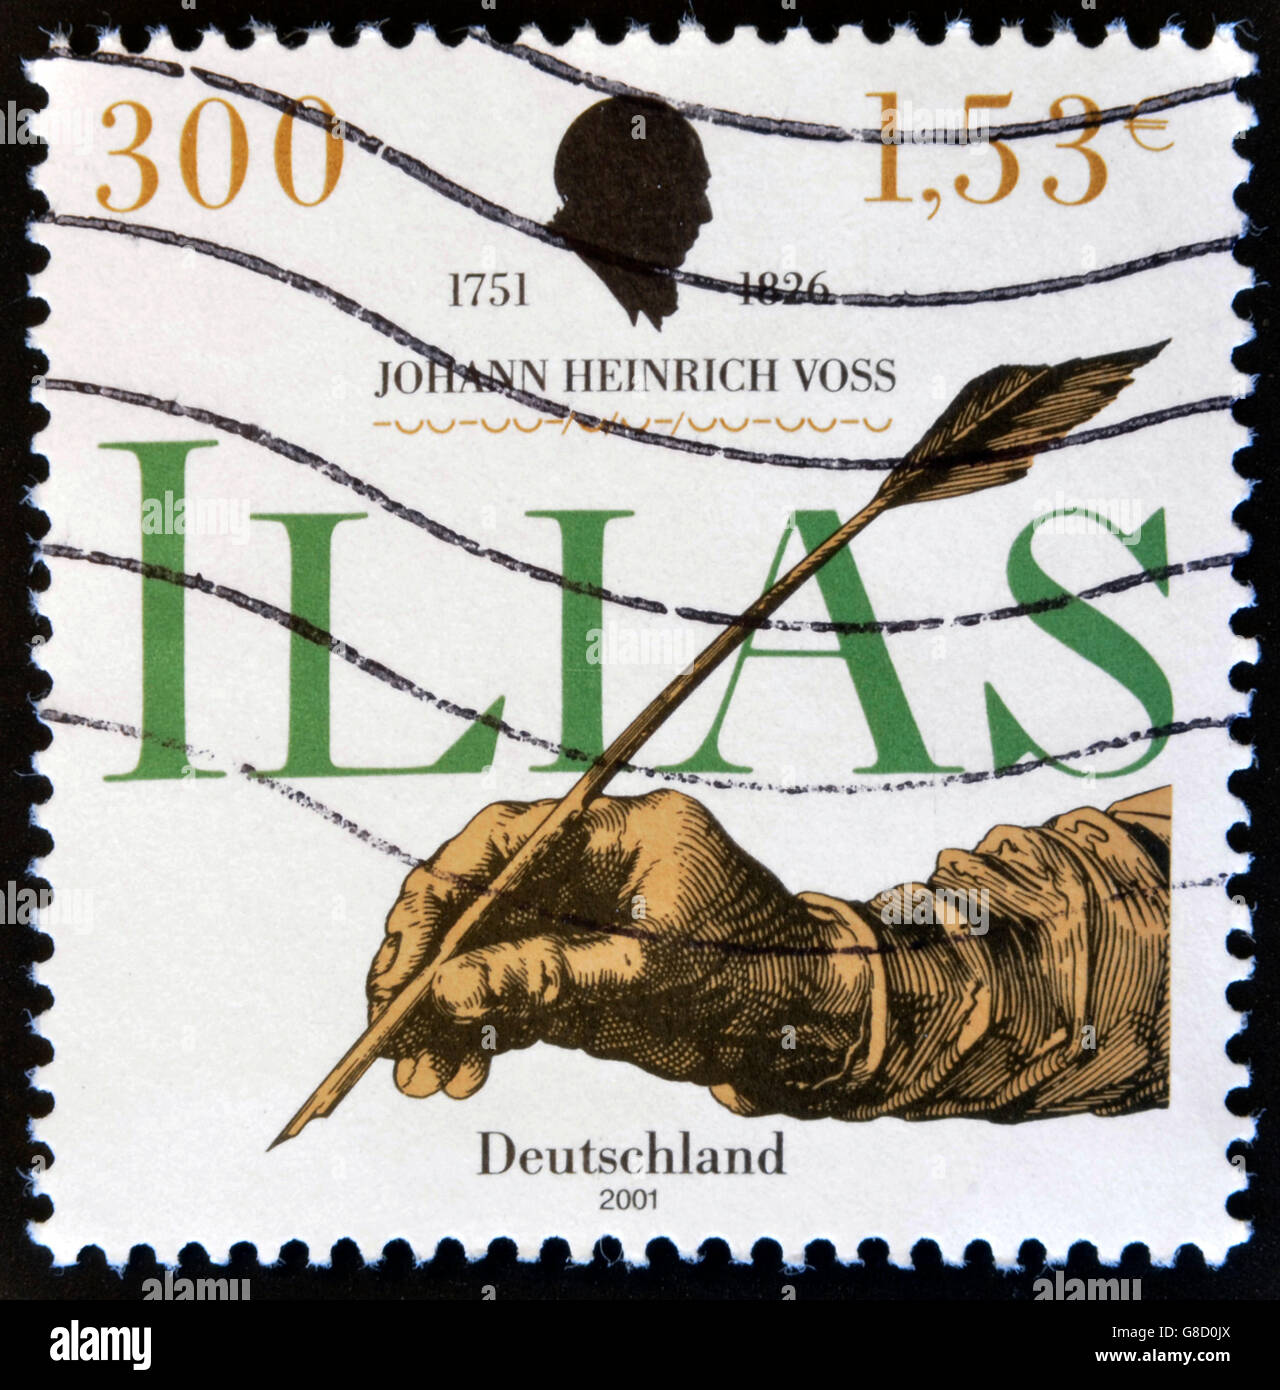 GERMANY- CIRCA 2001: stamp printed in Germany shows Hand writing with feather, Johann Heinrich Voss, circa 2001. Stock Photo